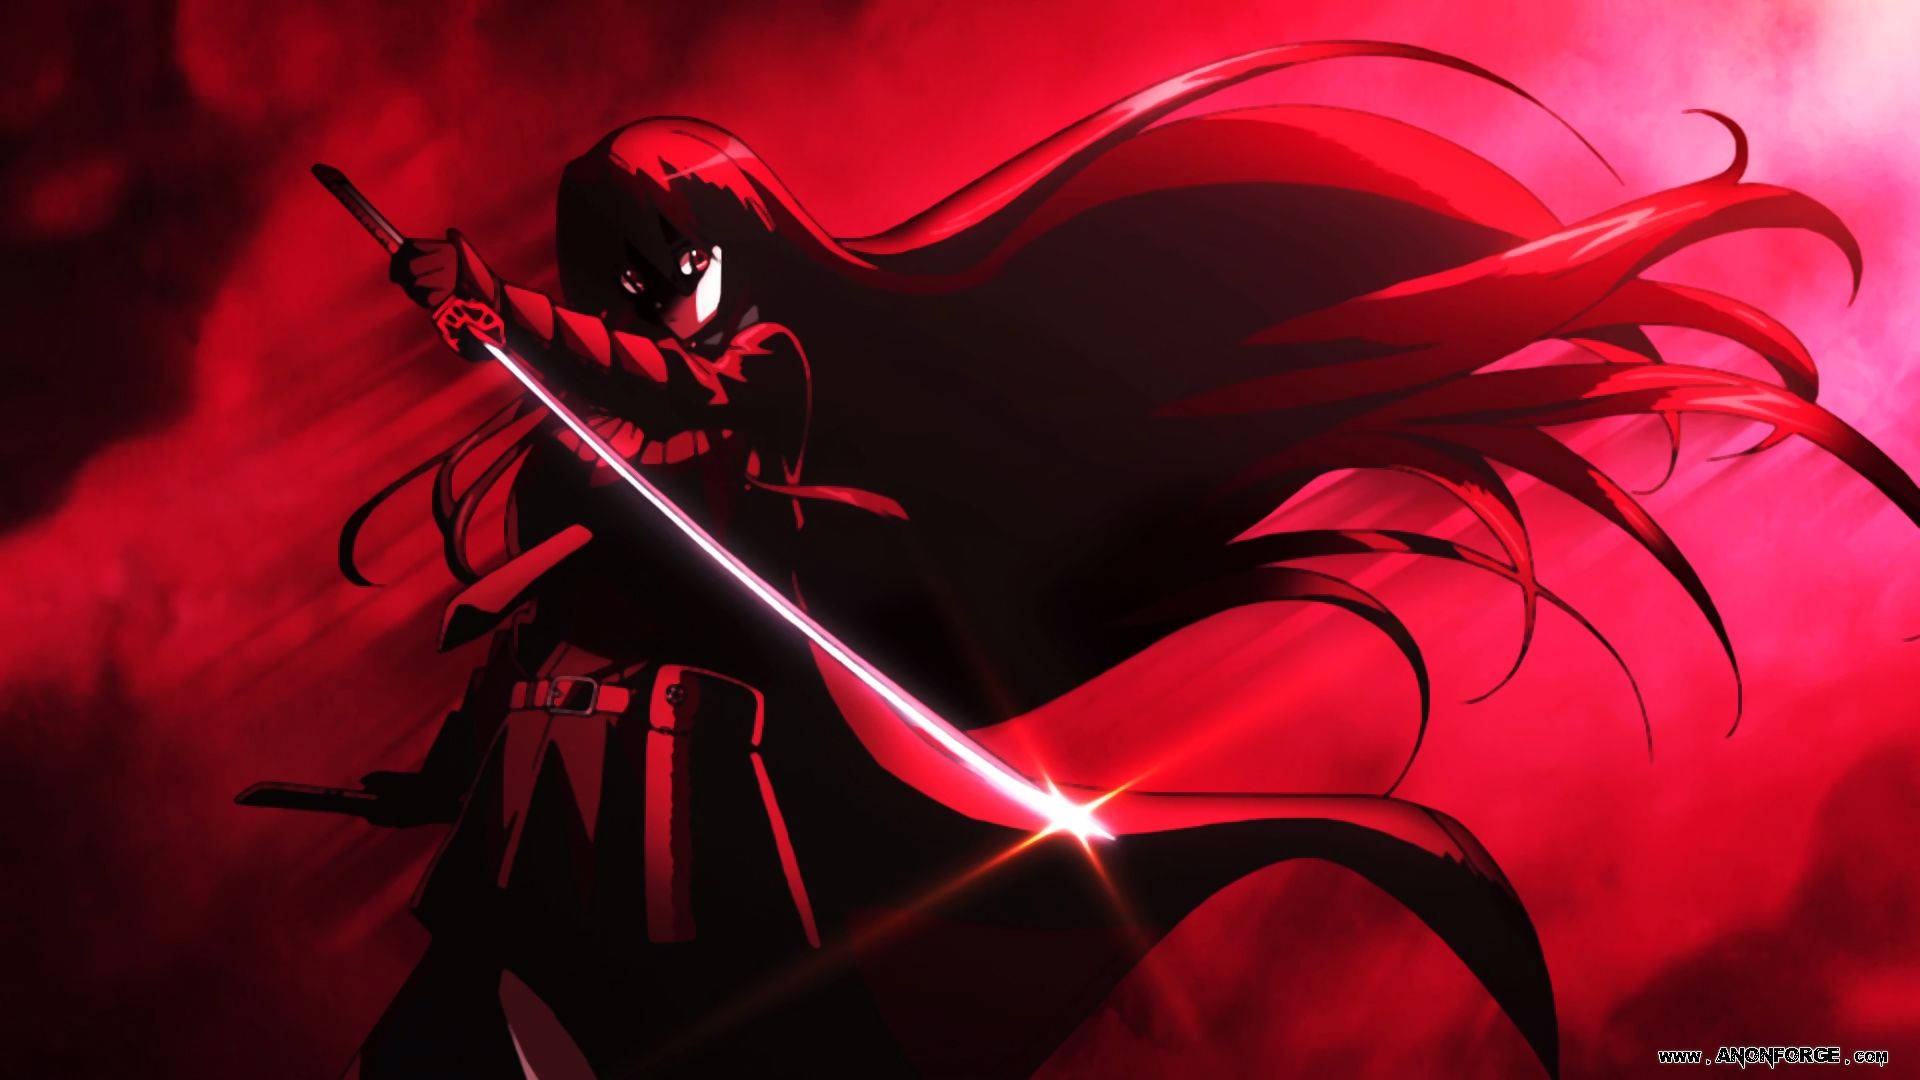 Akame from Akame Ga Kill poses with her glowing red sword Wallpaper